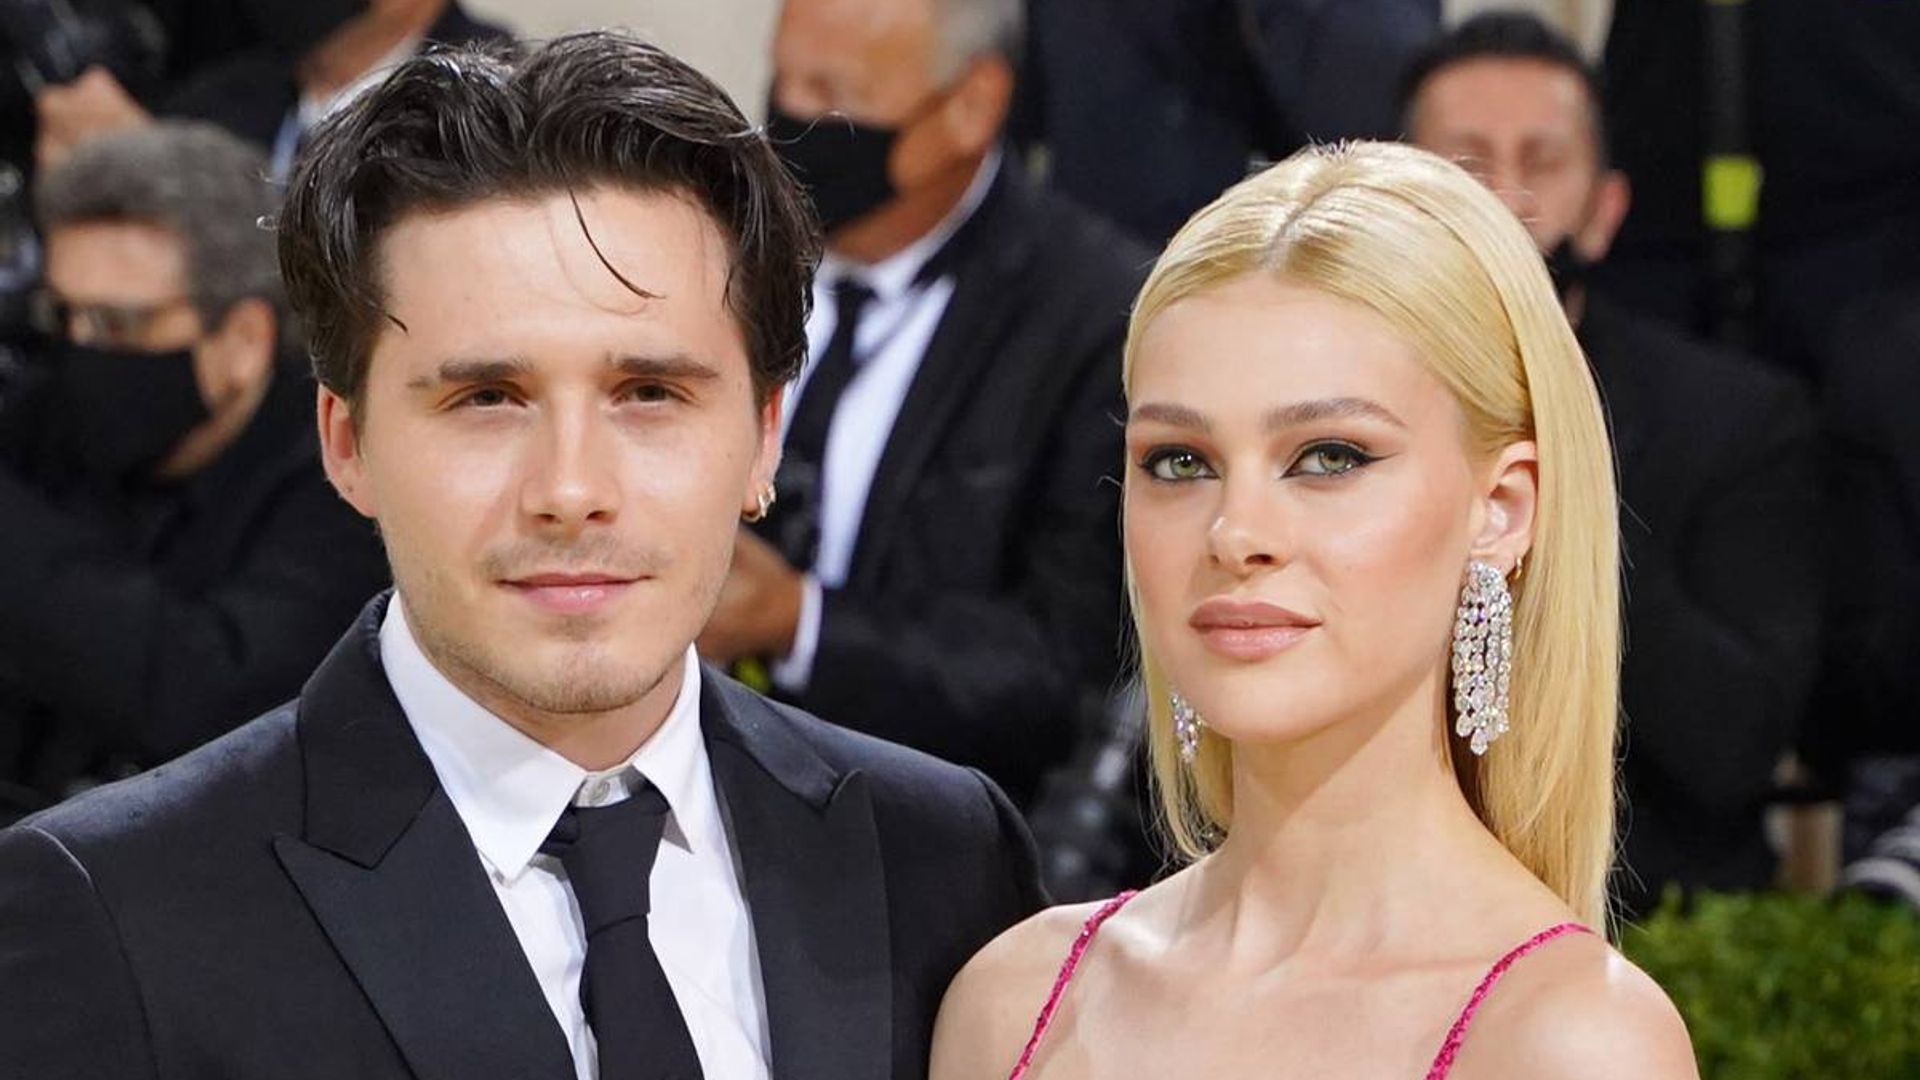 Brooklyn Beckham And Nicola Peltz Stun In Loved Up Snap At Intimate